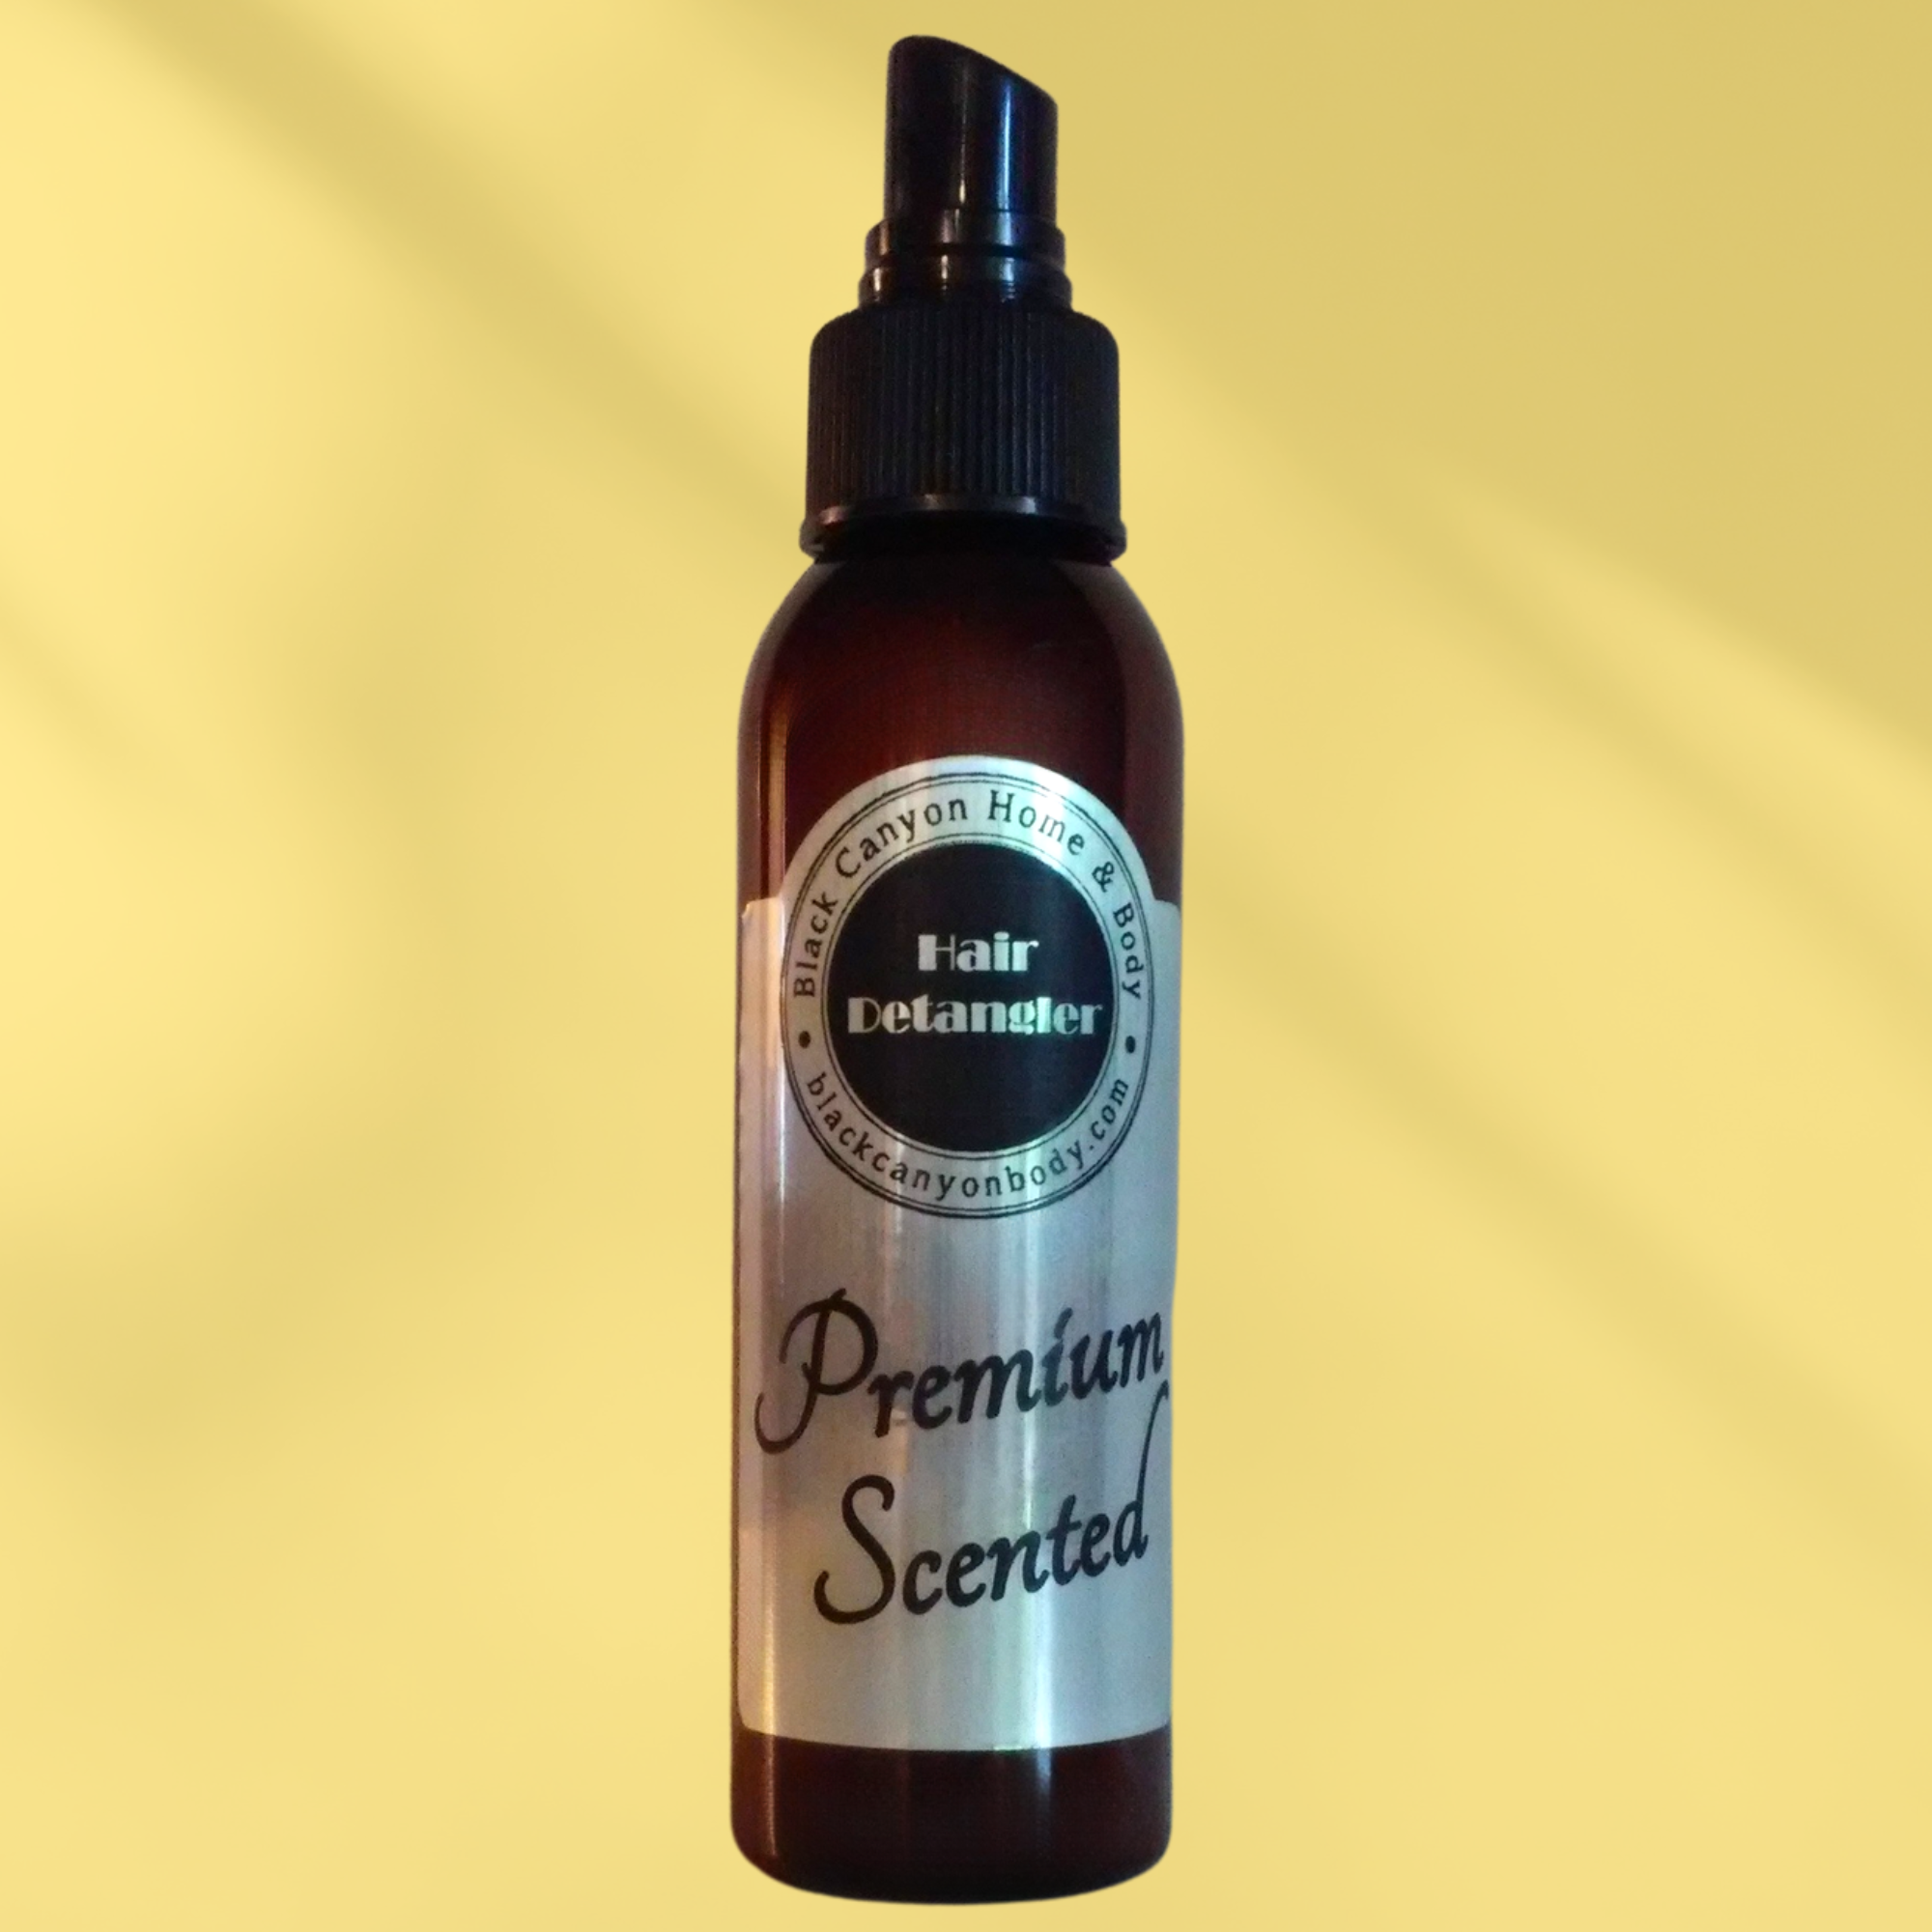 Black Canyon Vanilla Almond Scented Hair Detangler Spray with Olive Oil